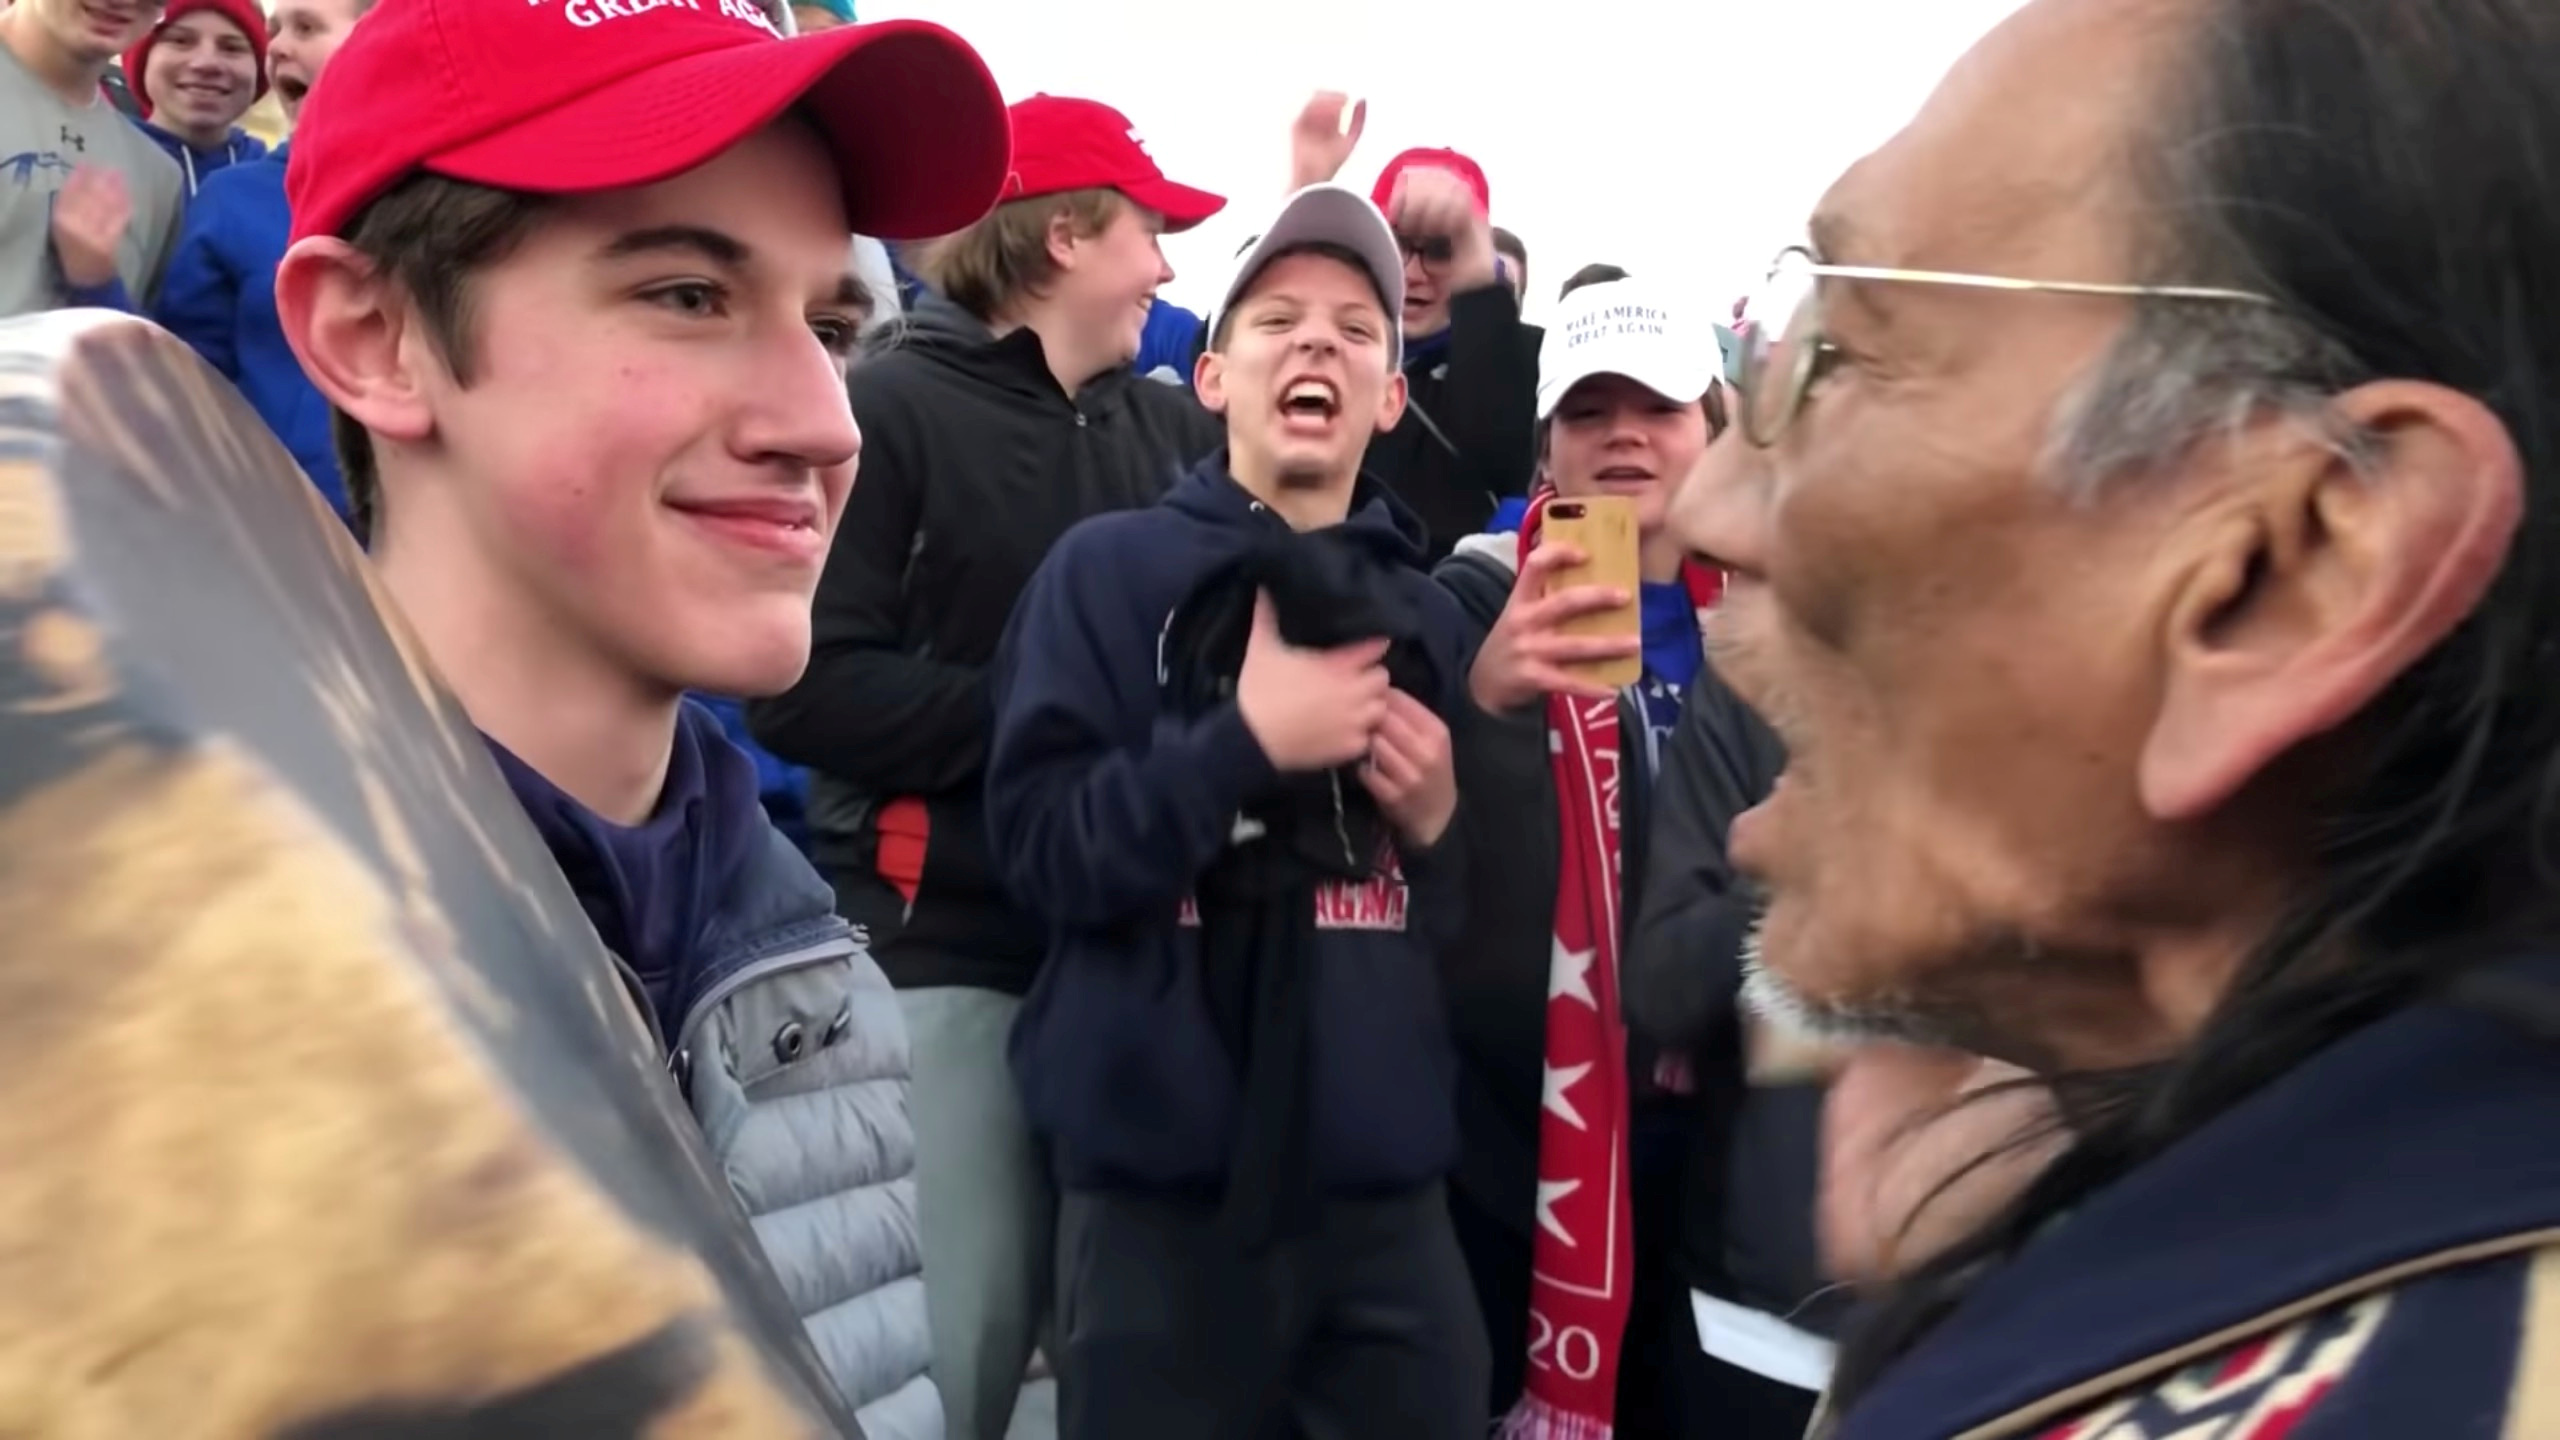 Nicholas Sandmann, 16, a student from Covington Catholic High School stands in front of Native American activist Nathan Phillips in Washington, U.S., in this still image from a January 18, 2019 video by Kaya Taitano. Kaya Taitano/Social Media/via REUTERS/File Photo